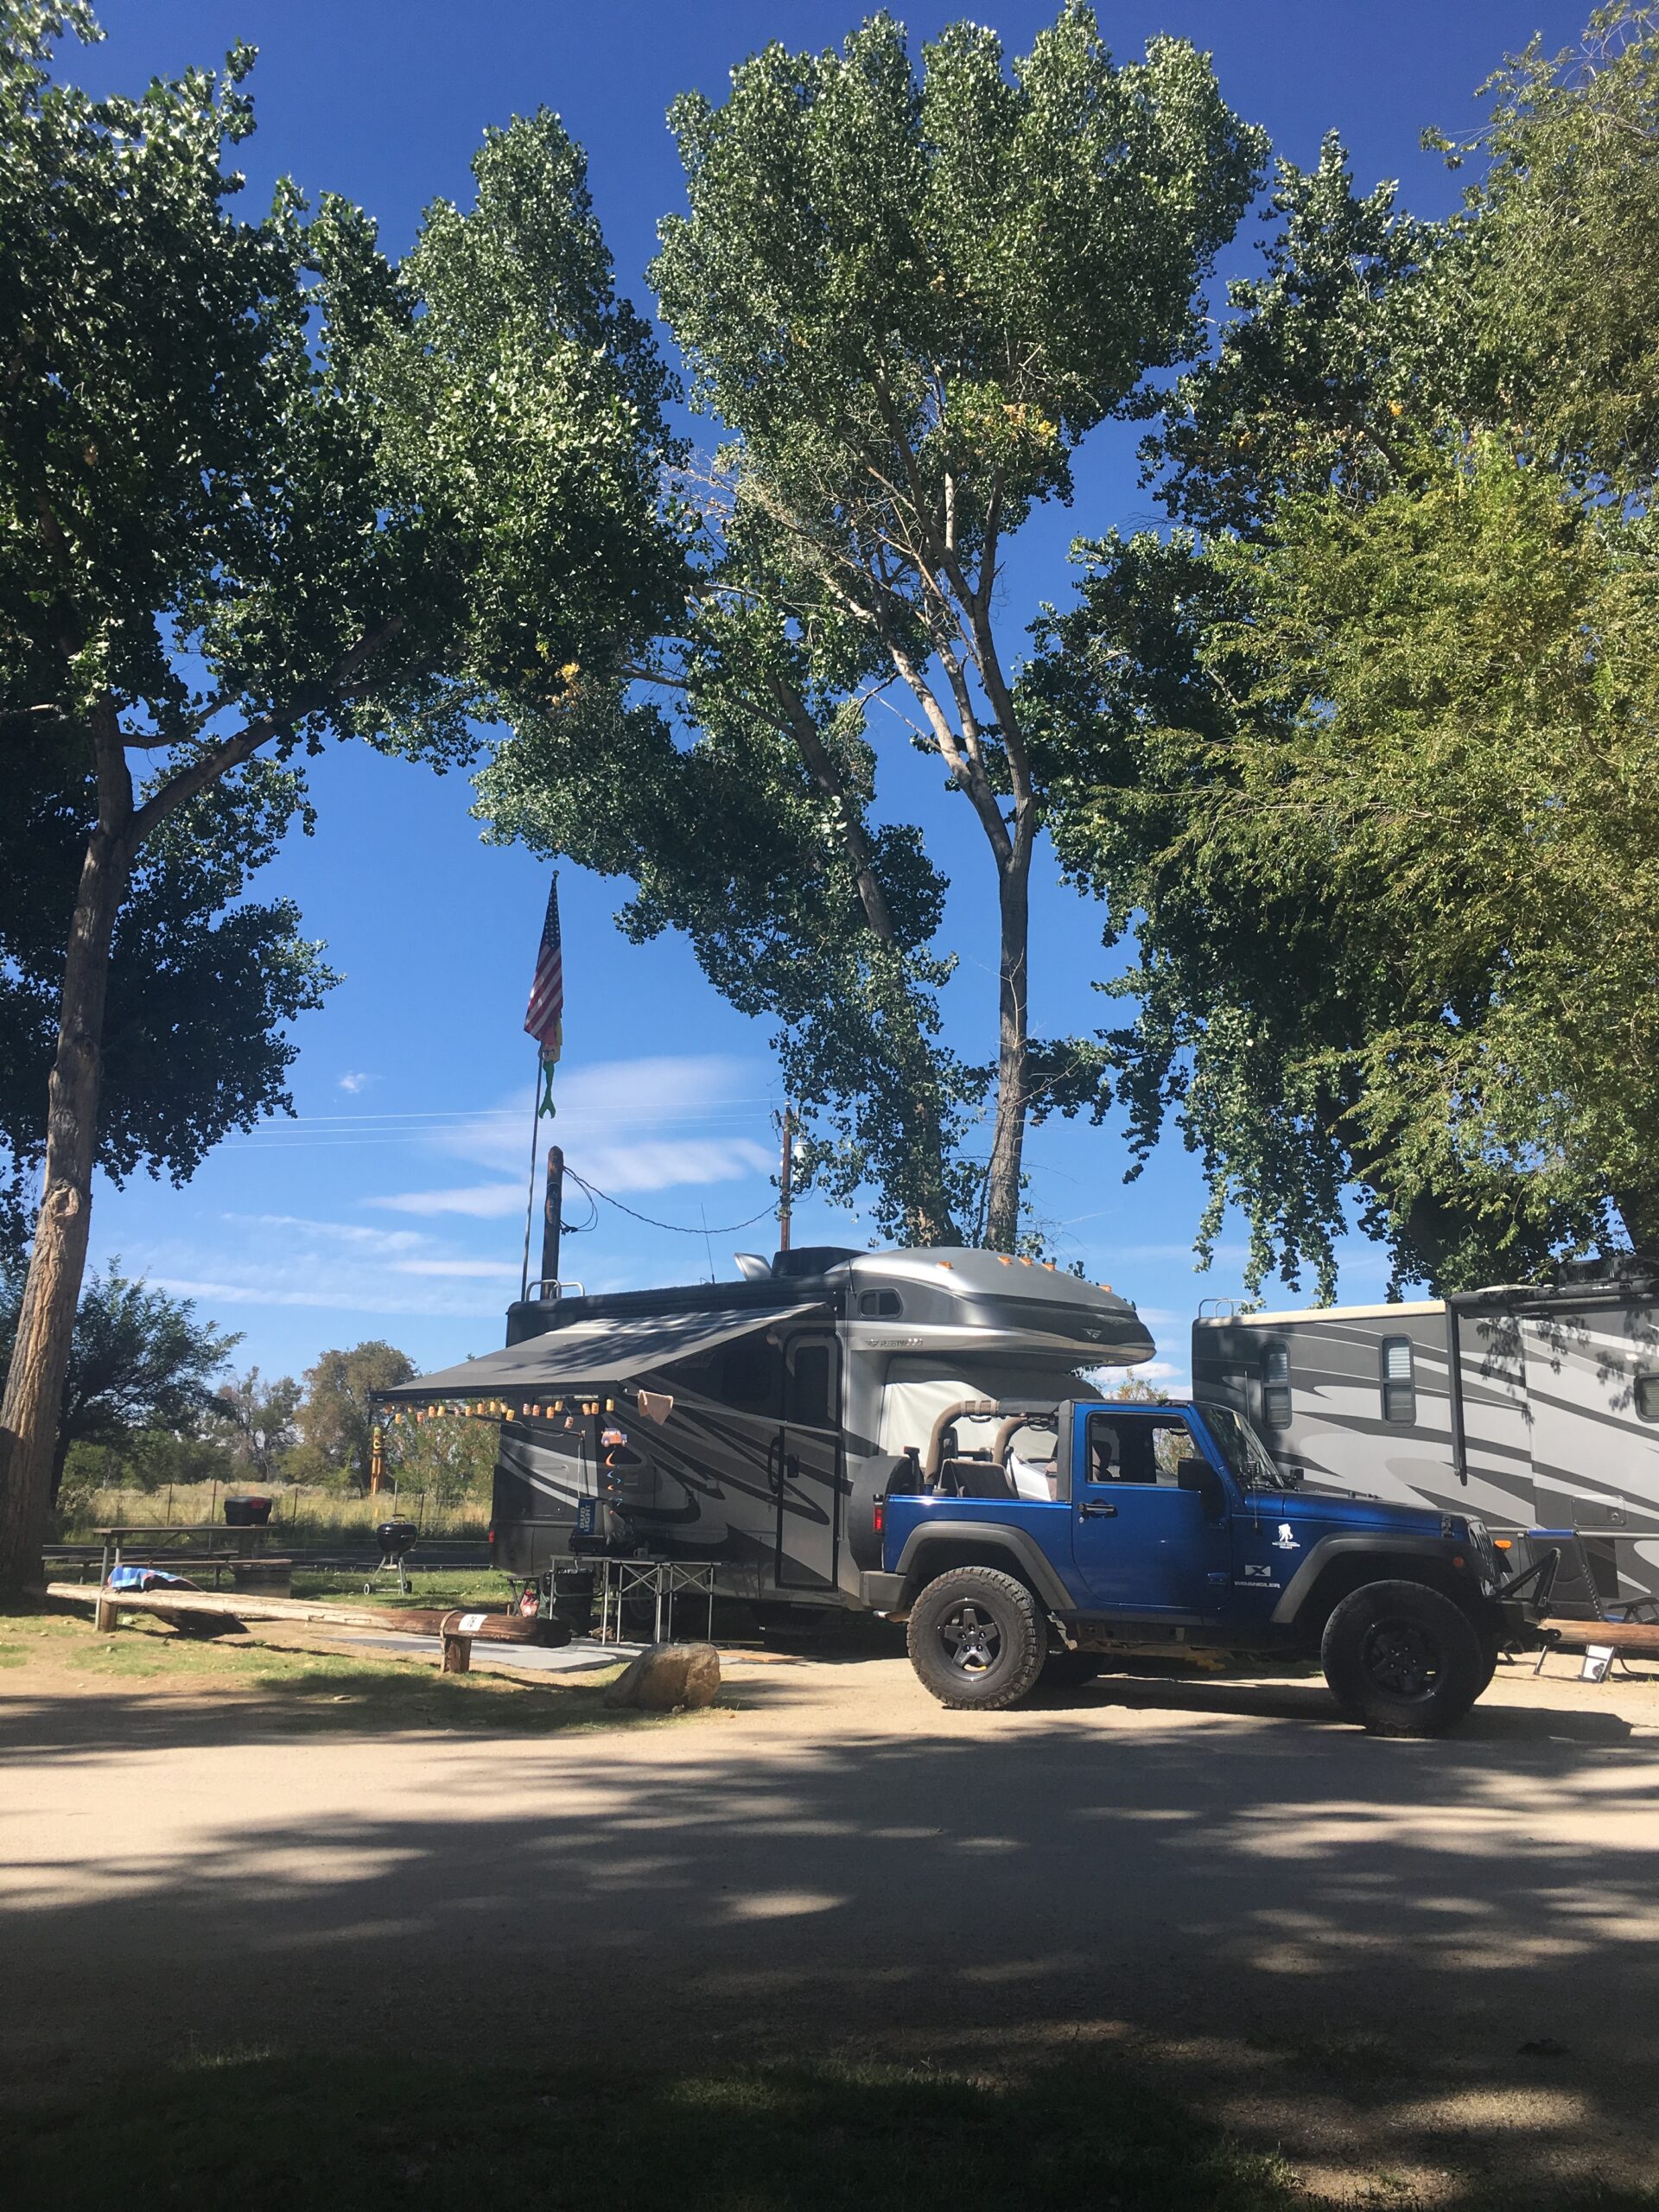 browns town campground